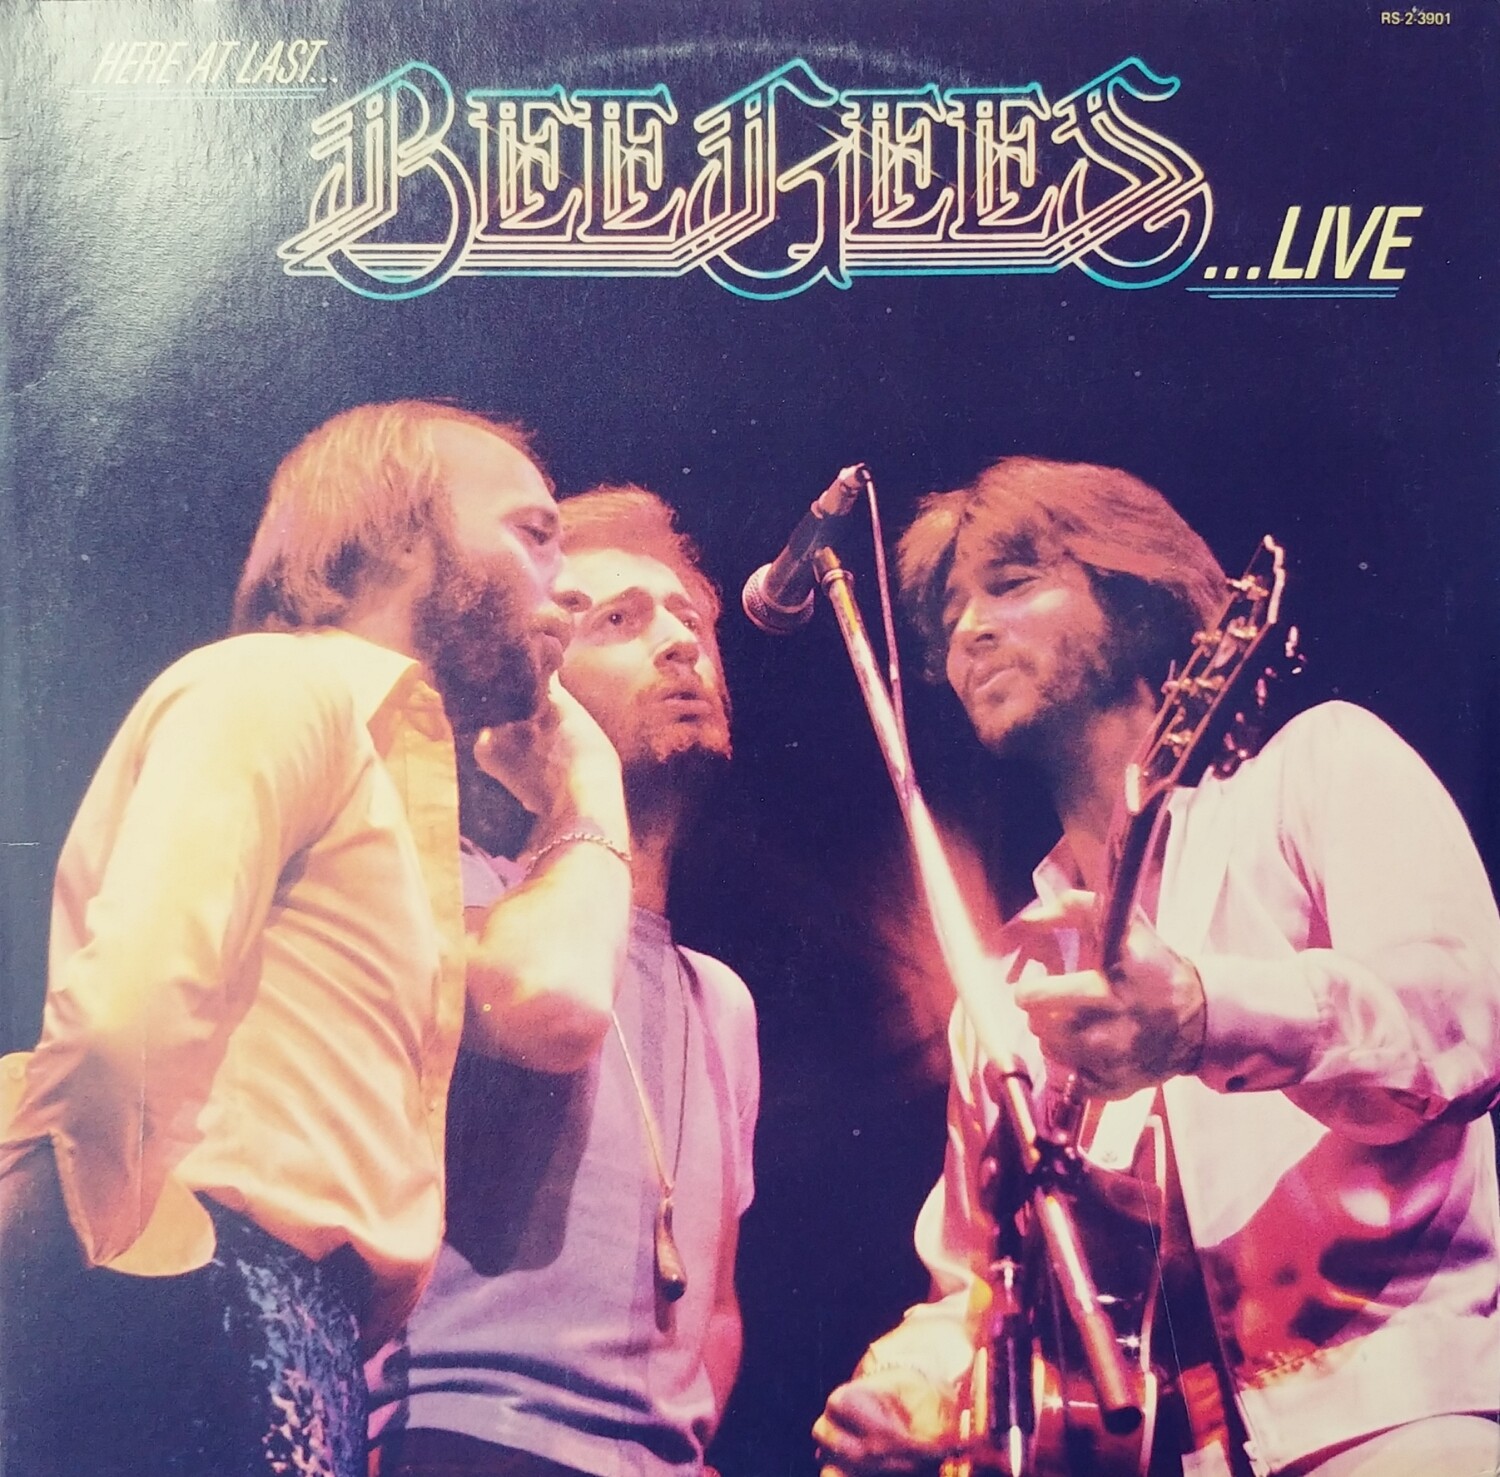 Bee Gees - Here at last LIVE